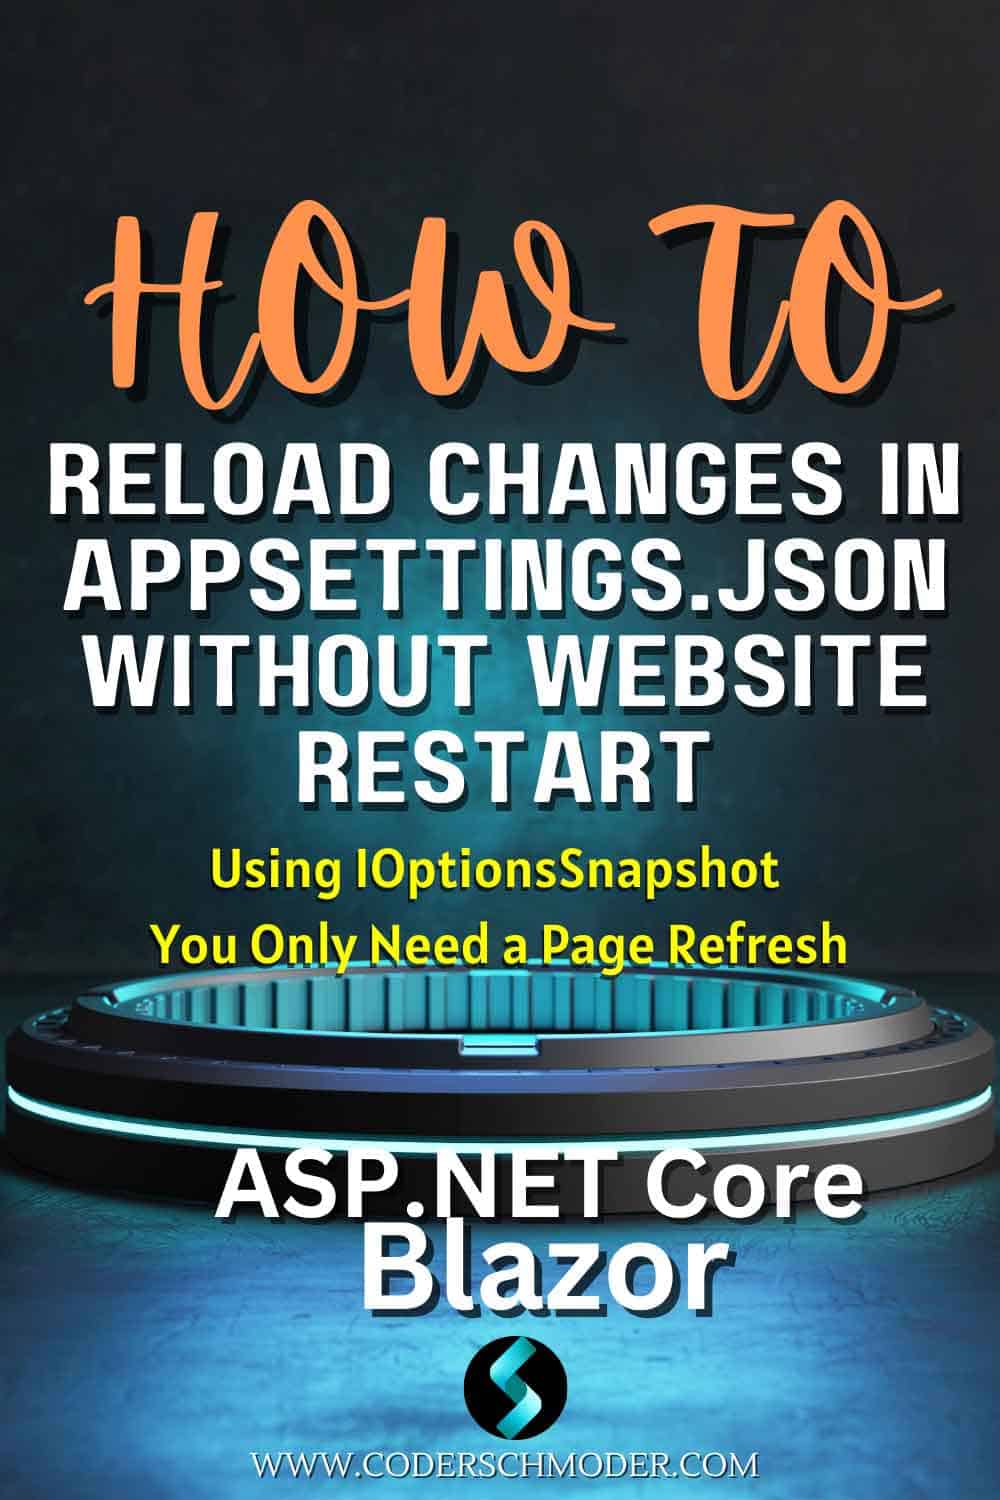 Reload changes in appsetting.json without website restart